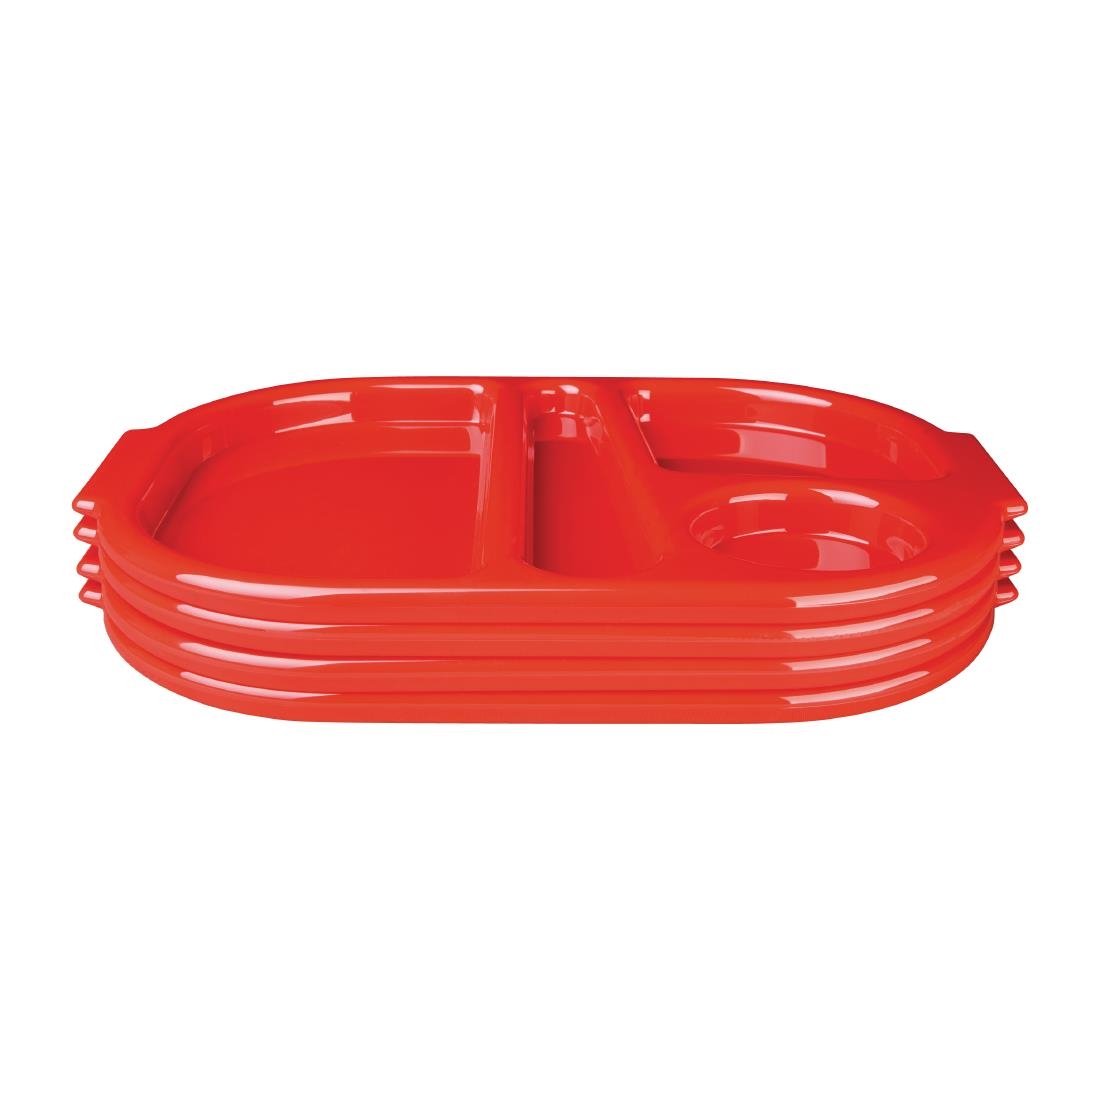 Kristallon Large Polycarbonate Compartment Food Trays Red 375mm JD Catering Equipment Solutions Ltd